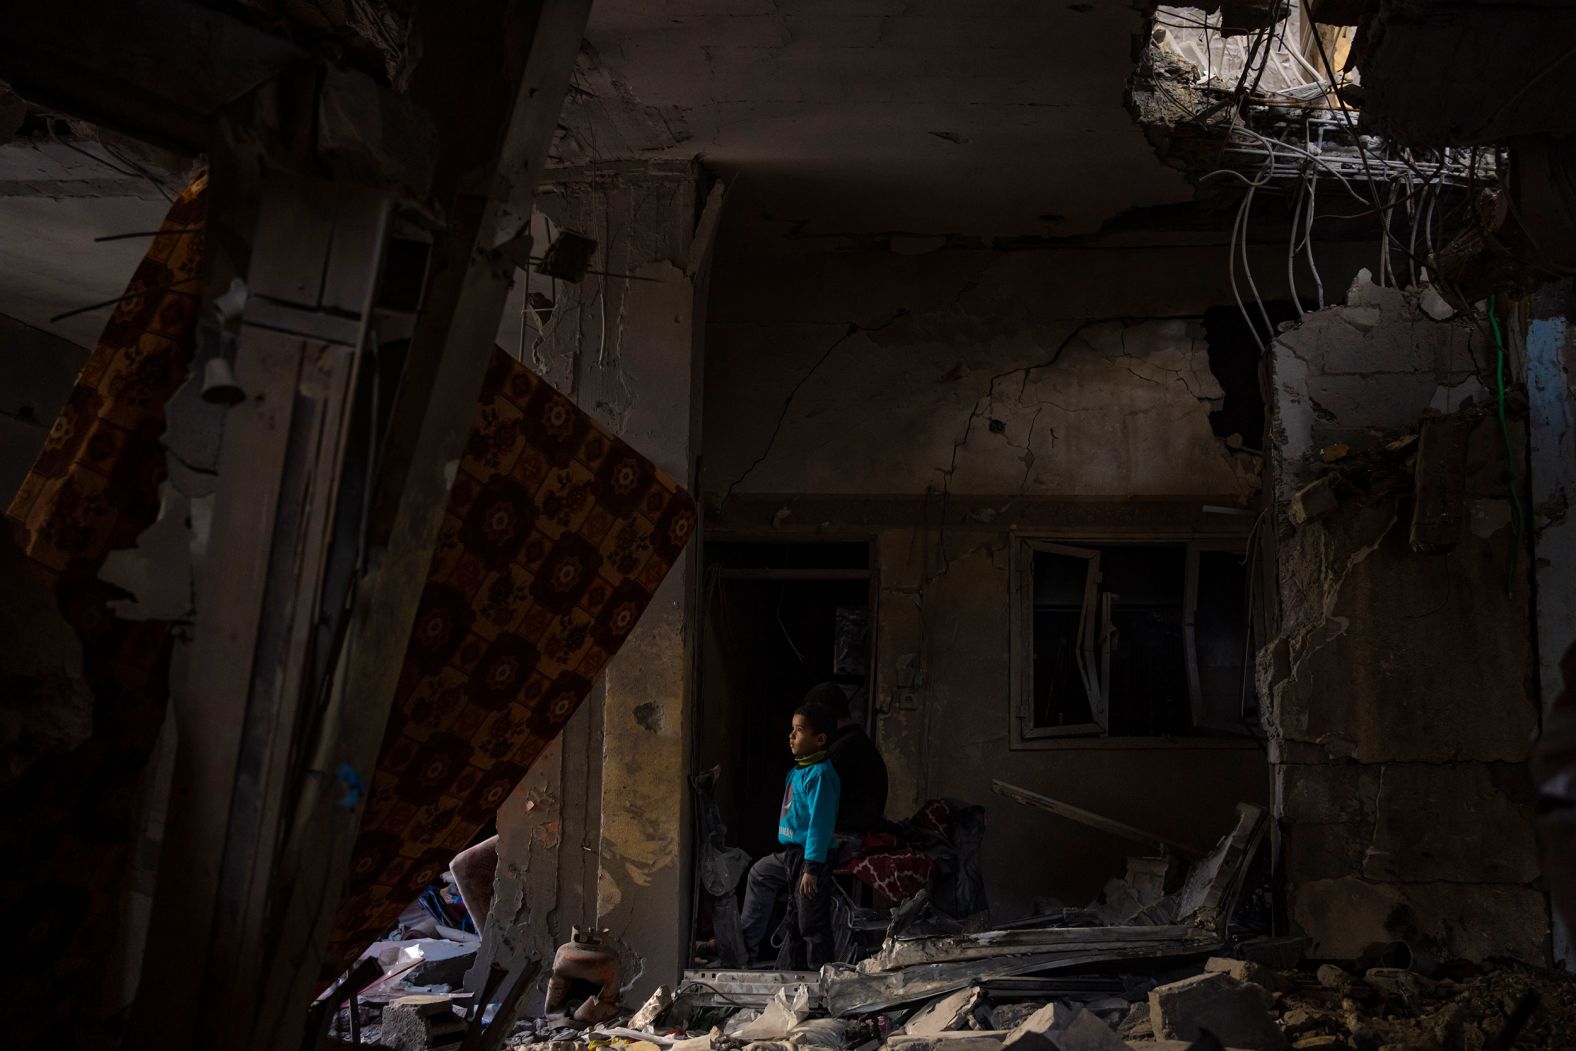 A Palestinian child looks at damage to his family's house after an Israeli strike in Rafah, Gaza, on Thursday, February 8. Israel has been bombarding Rafah with airstrikes and shelling for weeks as it continues its war against the Hamas militant group that attacked the country in October.